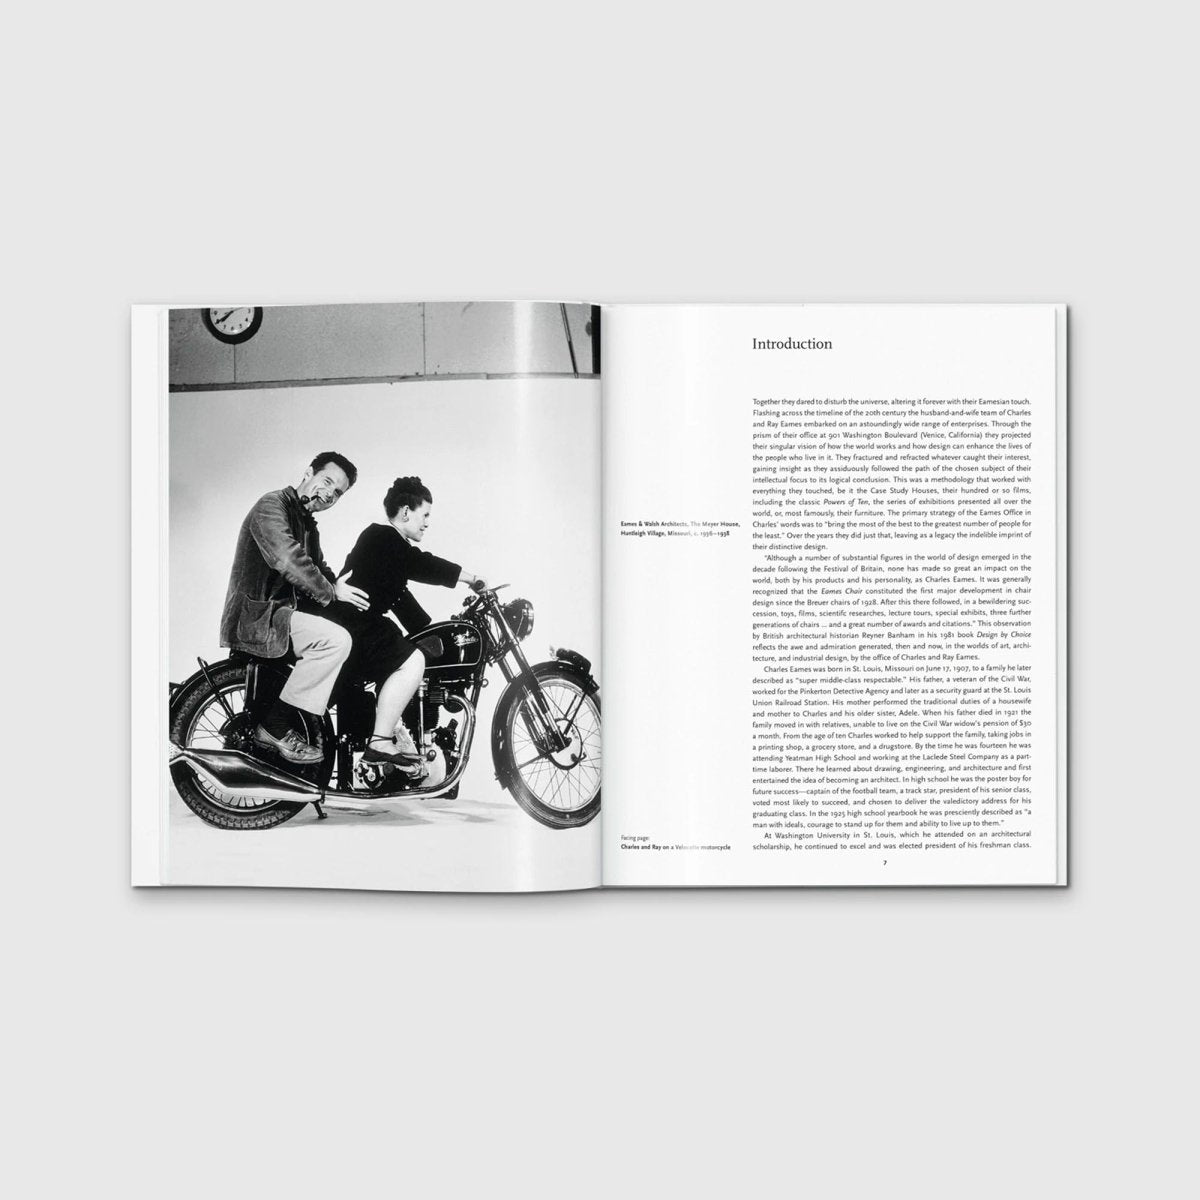 Eames: Charles and Ray Eames - Autotype